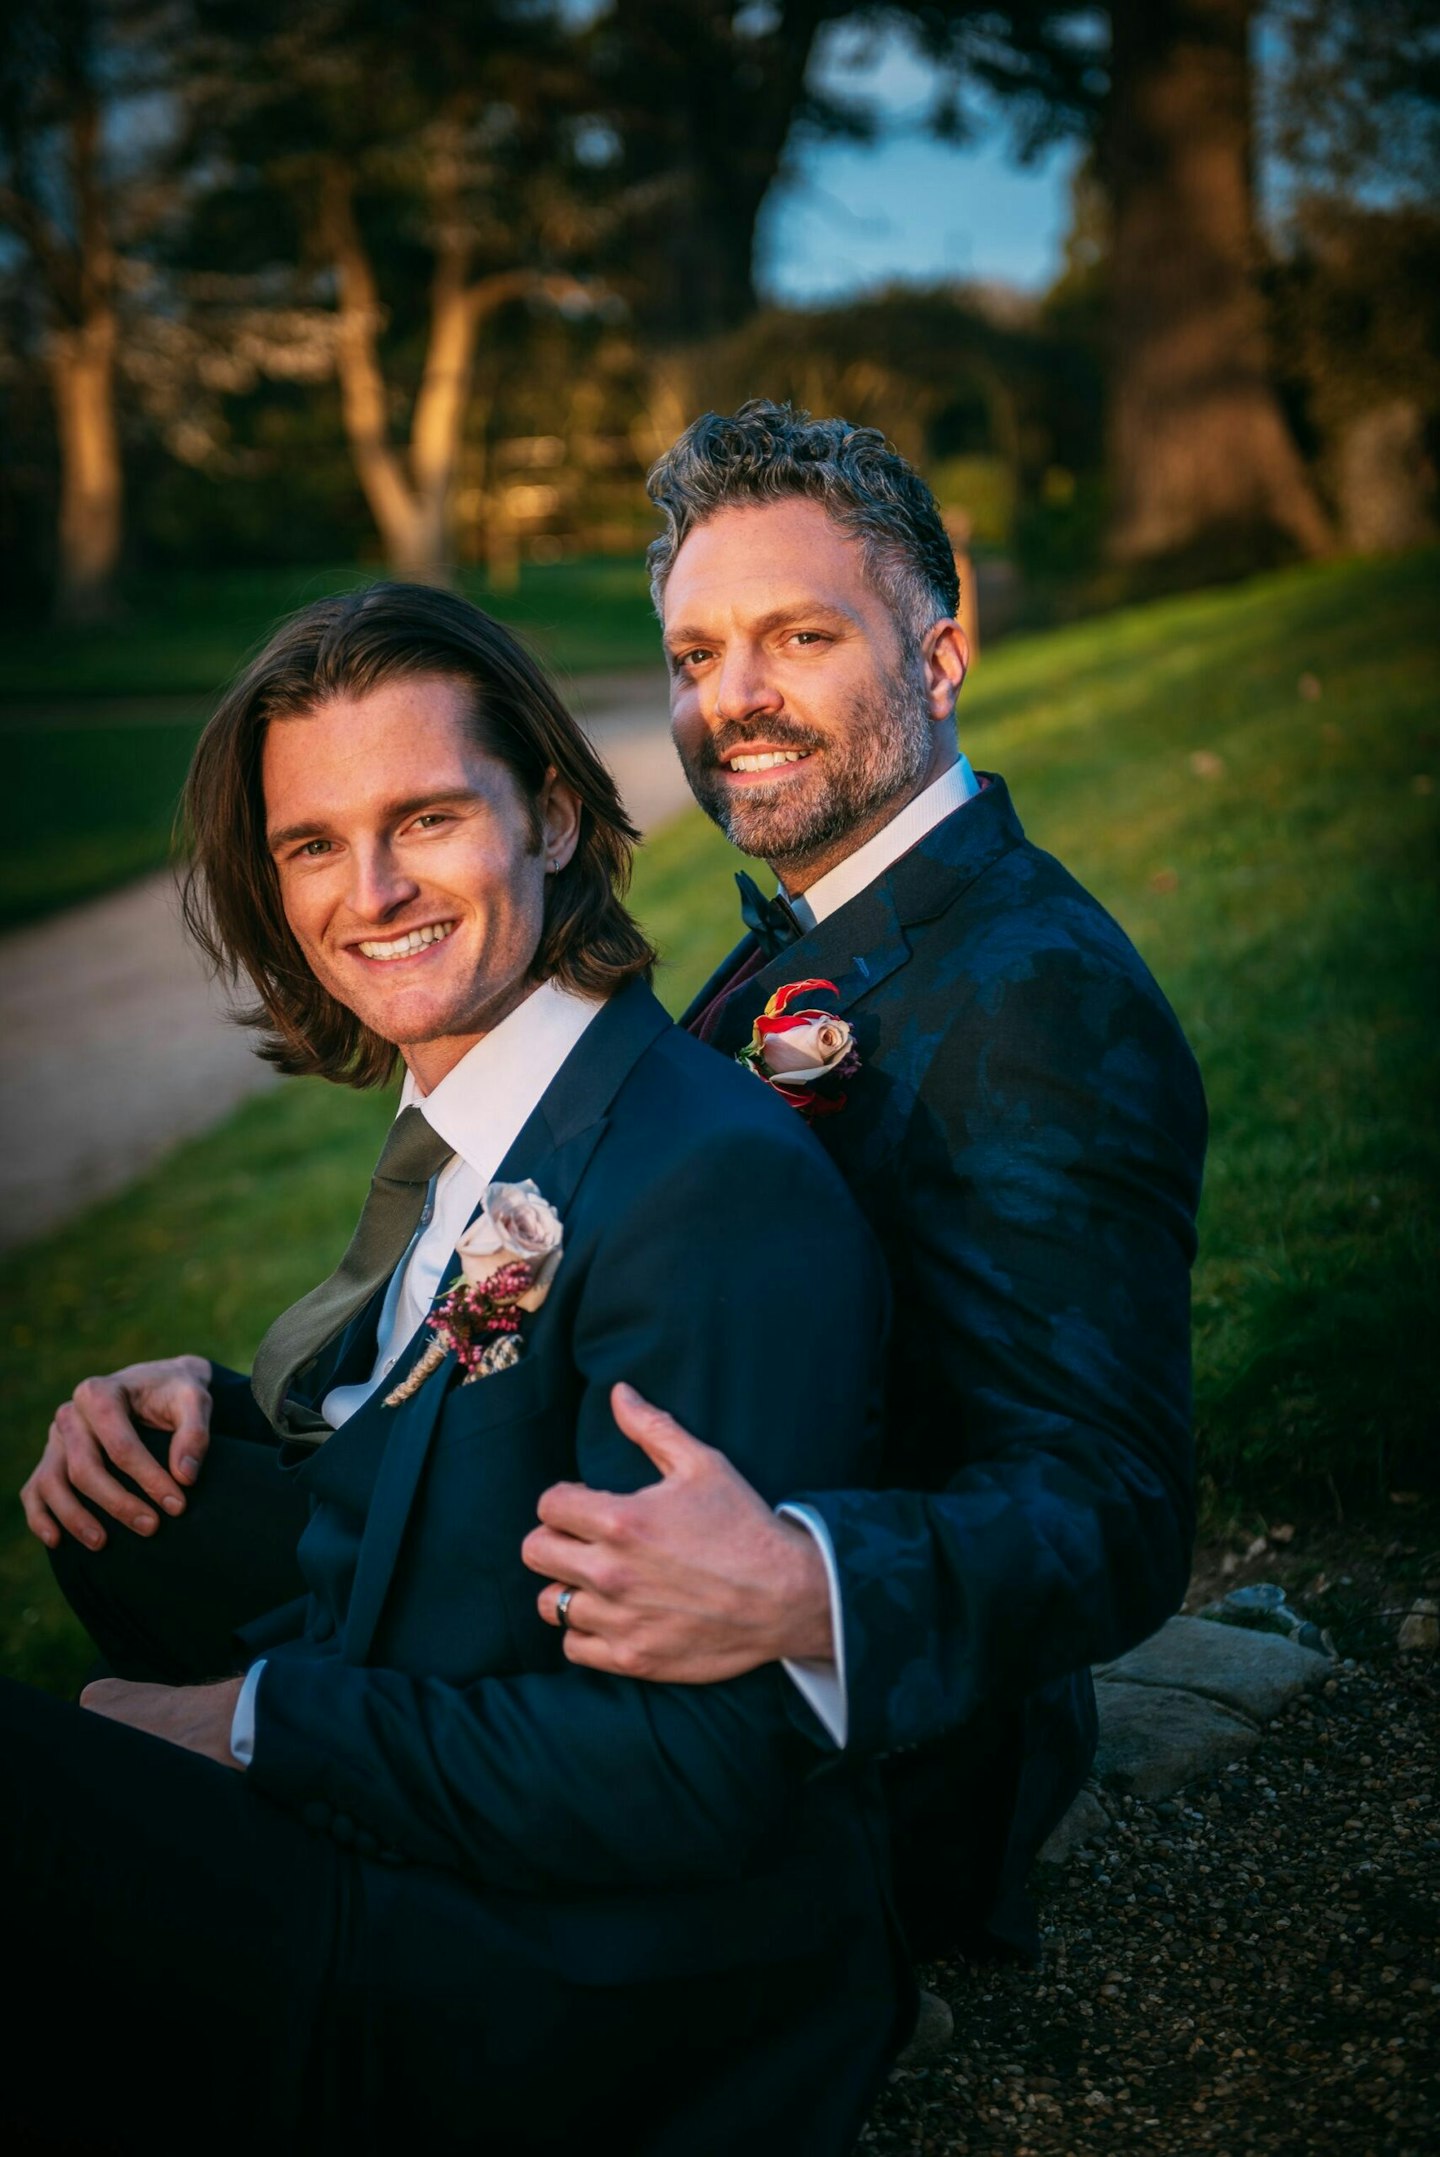 Daniel and Matt from Married At First Sight UK on their wedding day